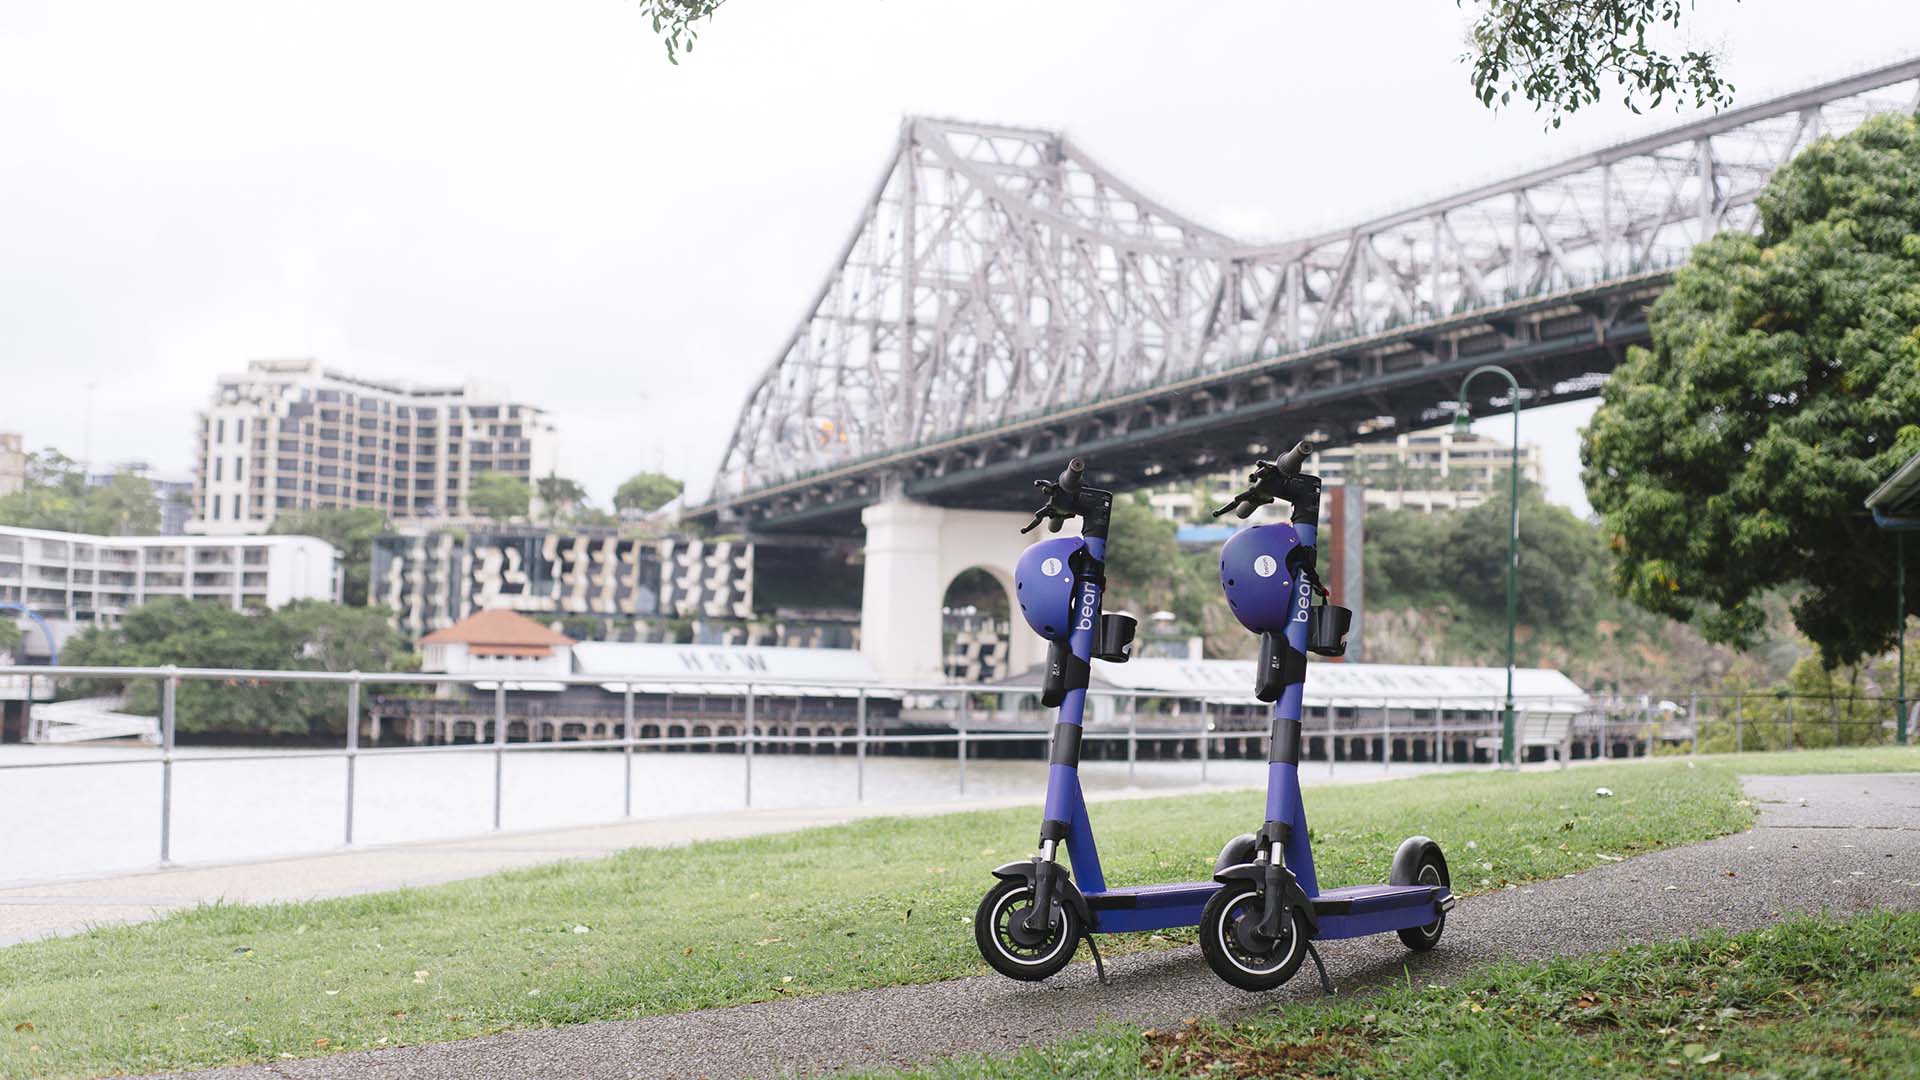 Beam Is Brisbane's New Purple-Hued E-Bike and E-Scooter Service with Designated Parking Spots